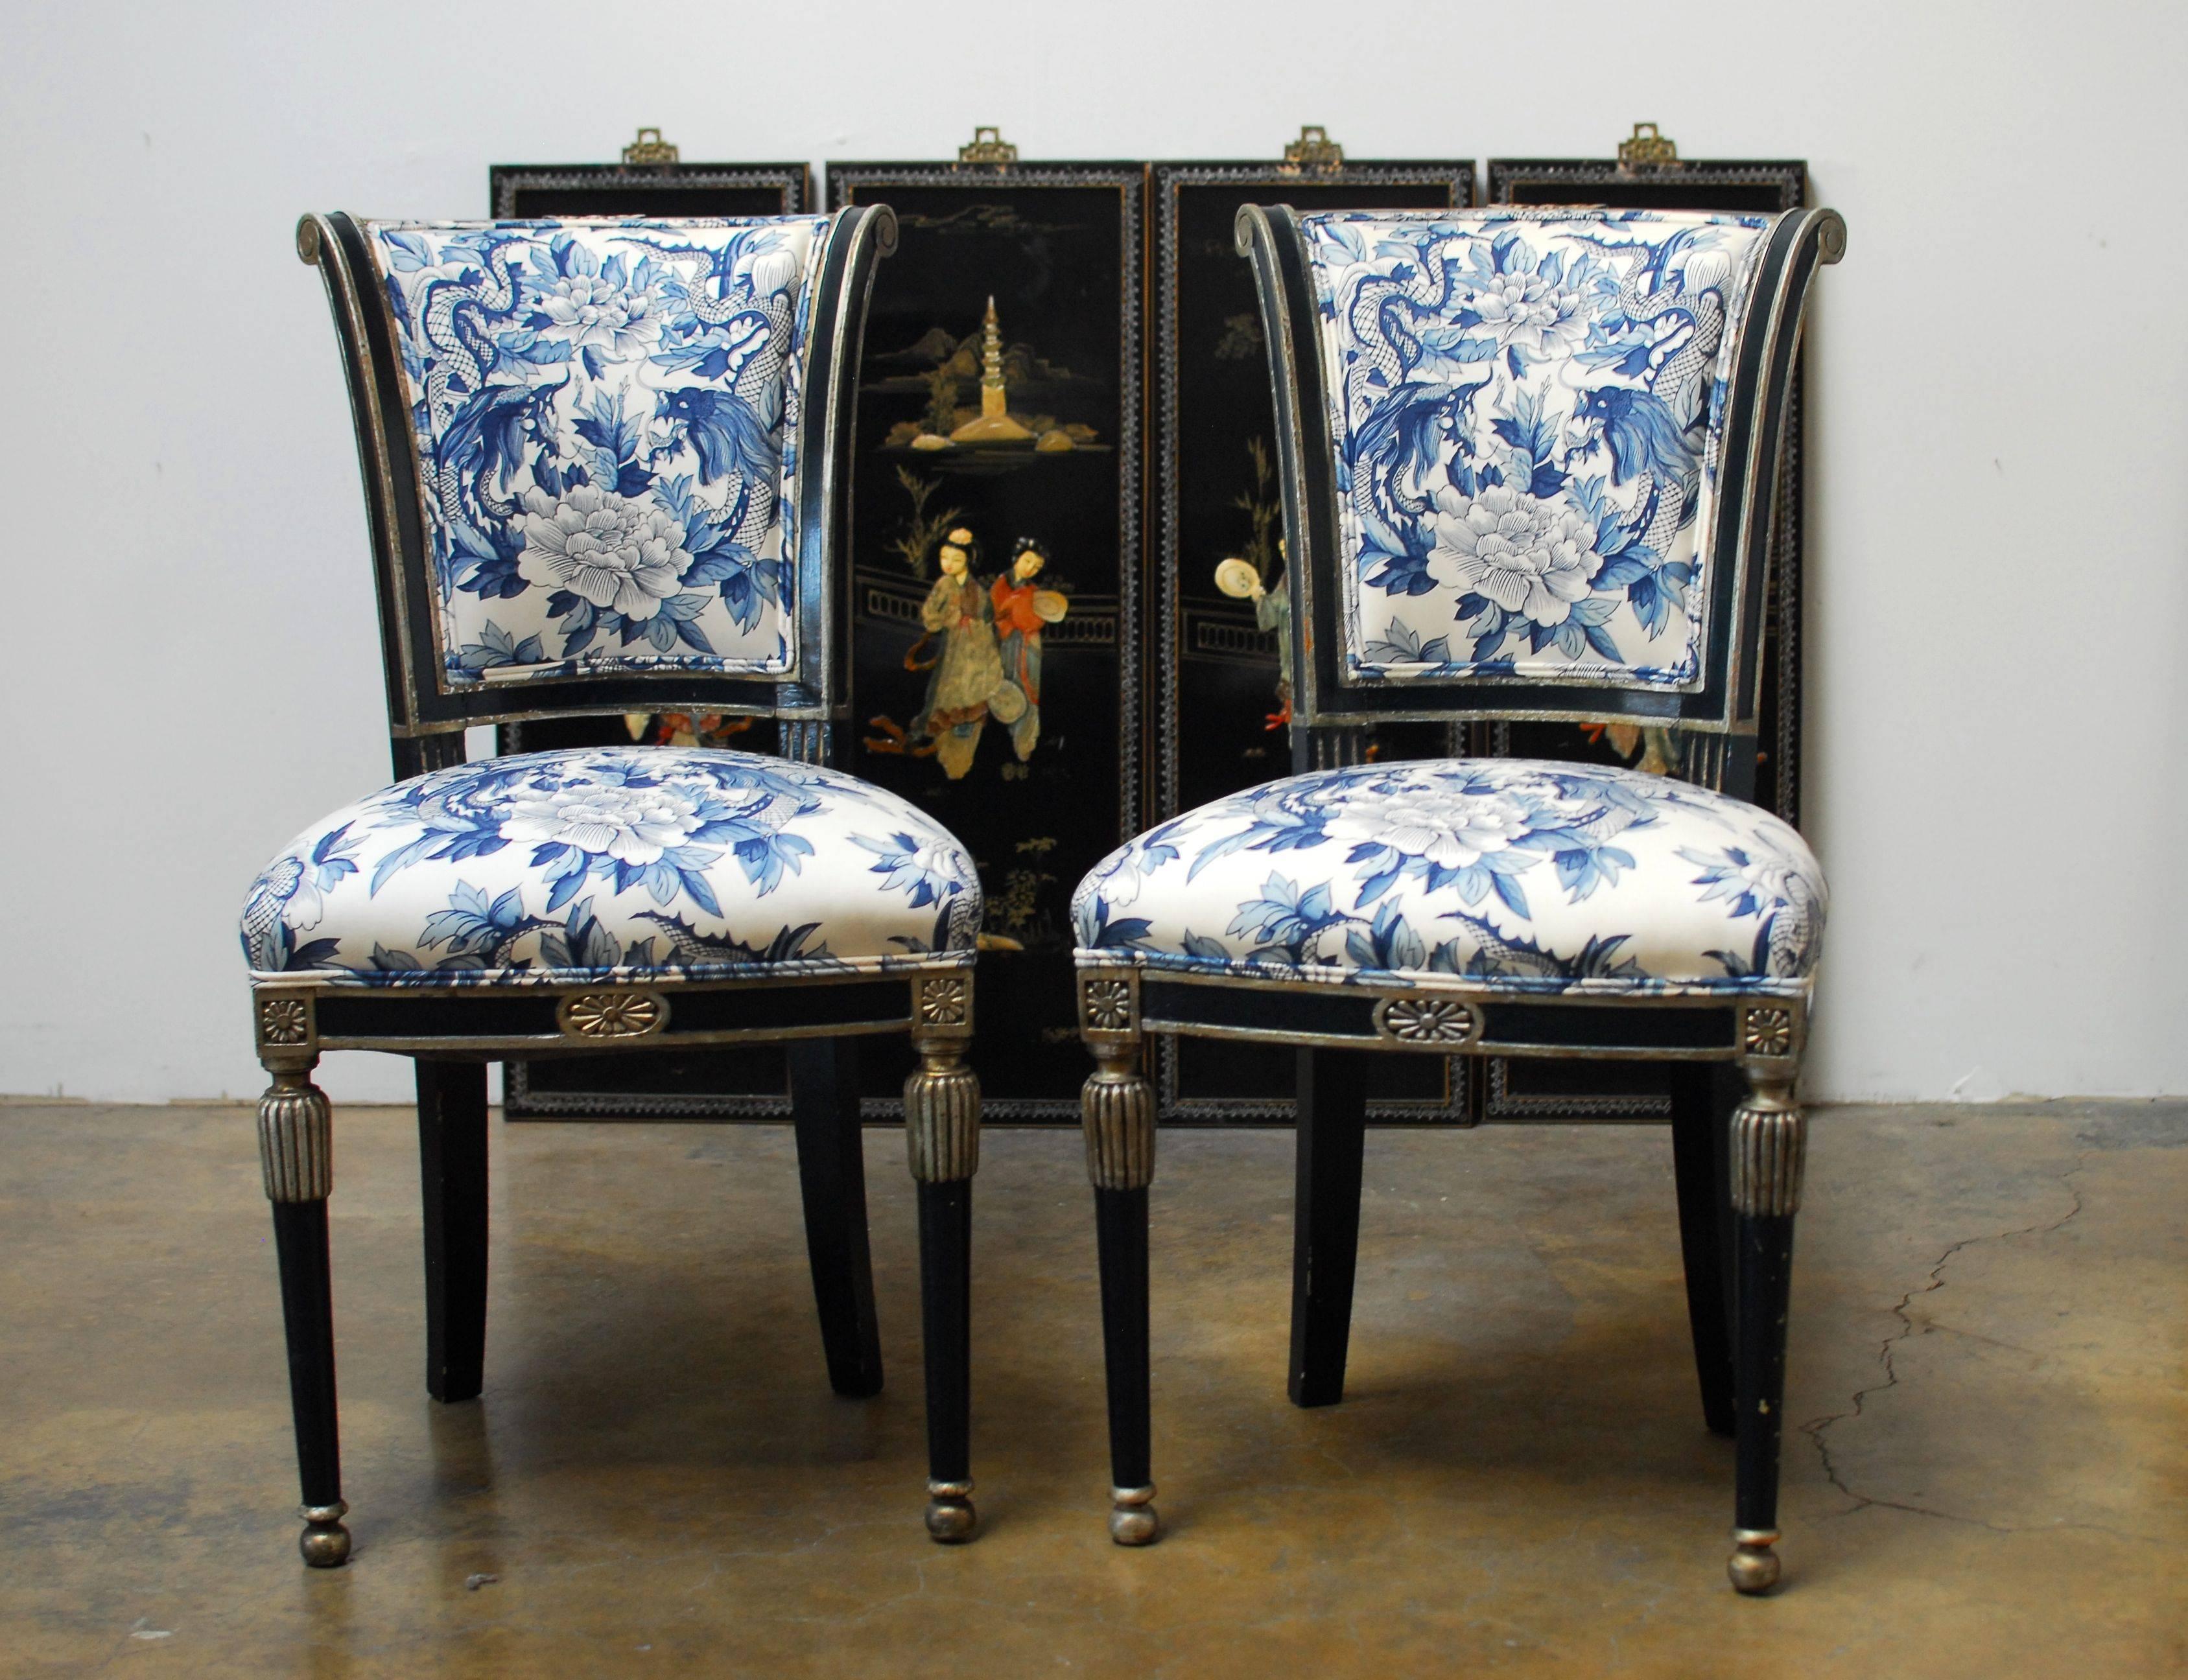 French Directoire Style Chairs with Chinoiserie Dragon Upholstery 1